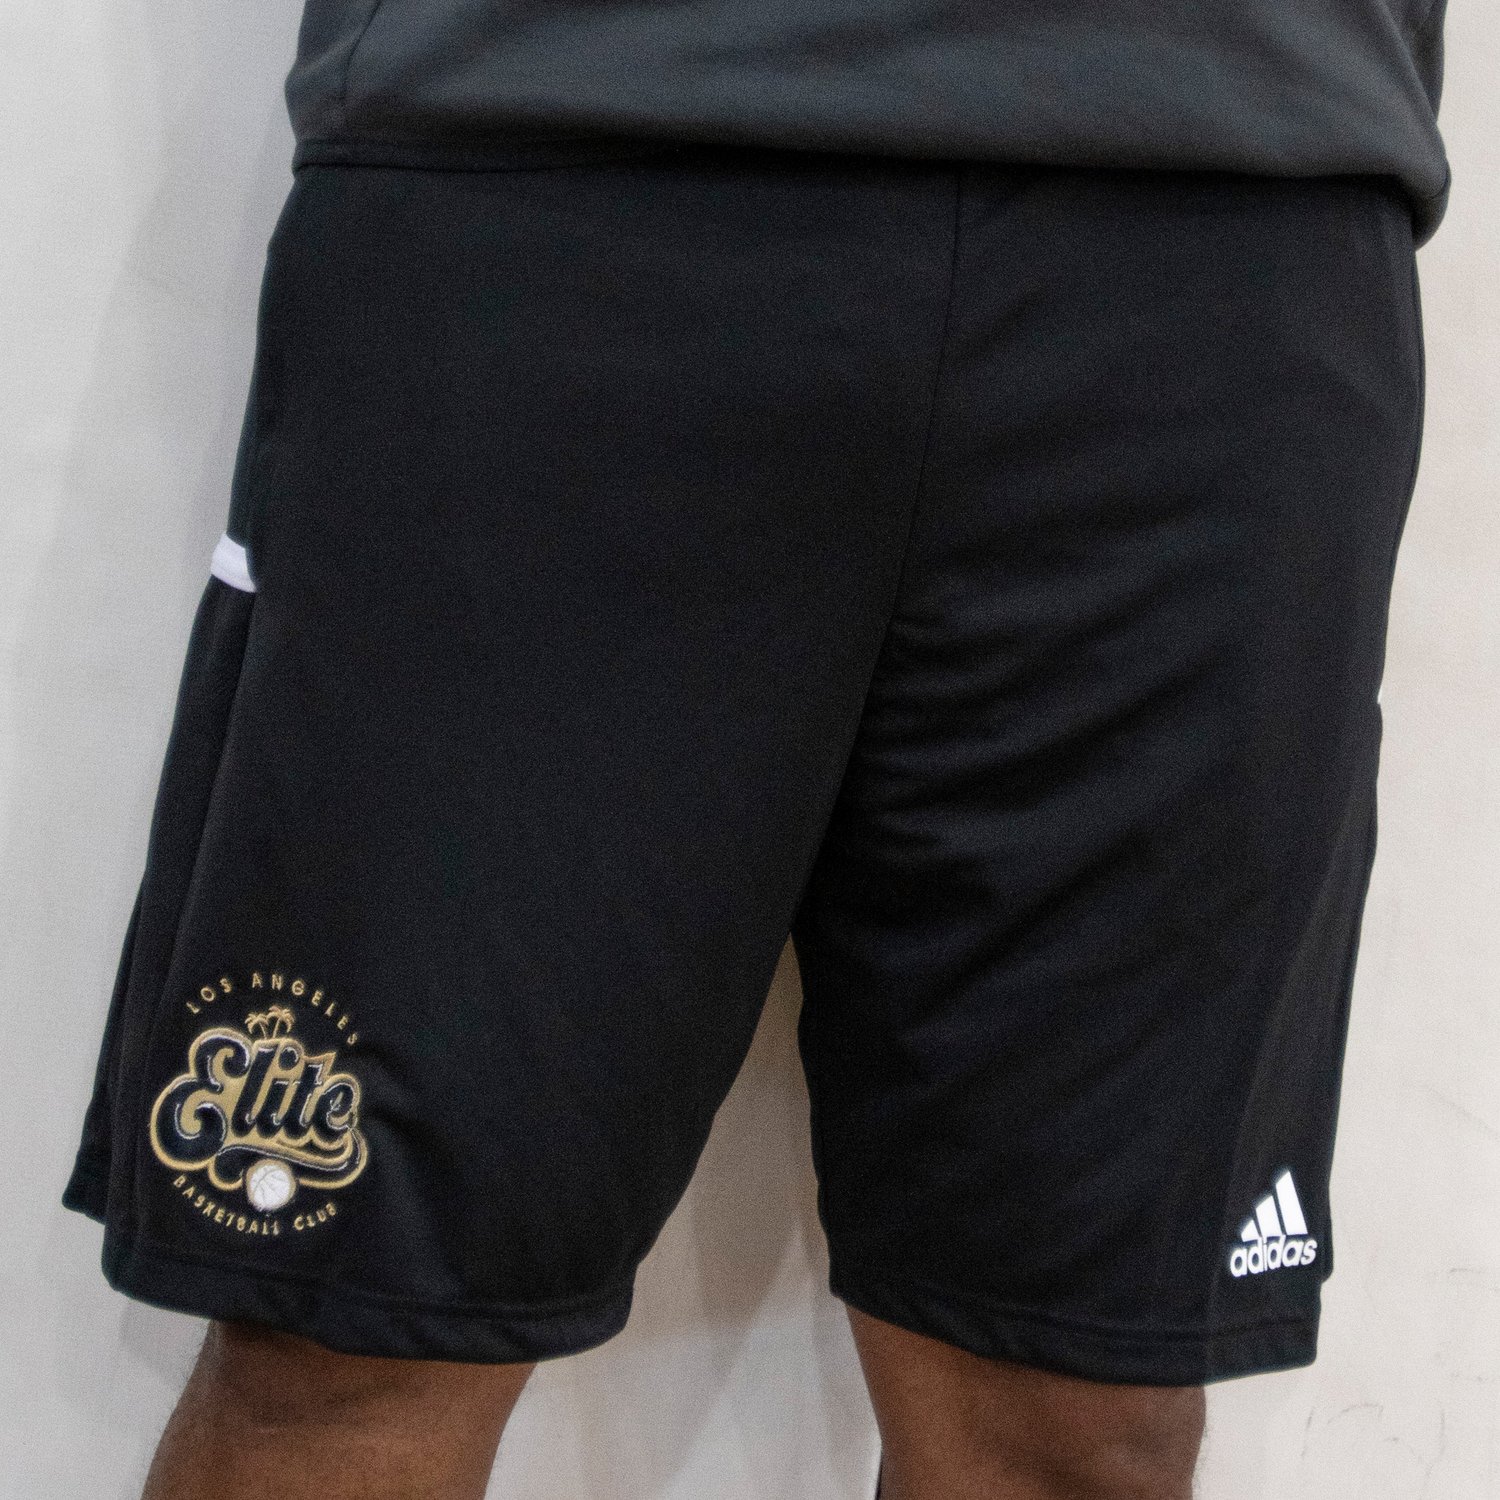 — WELCOME ELITE SHORTS TO LOS ANGELES ATHLETIC